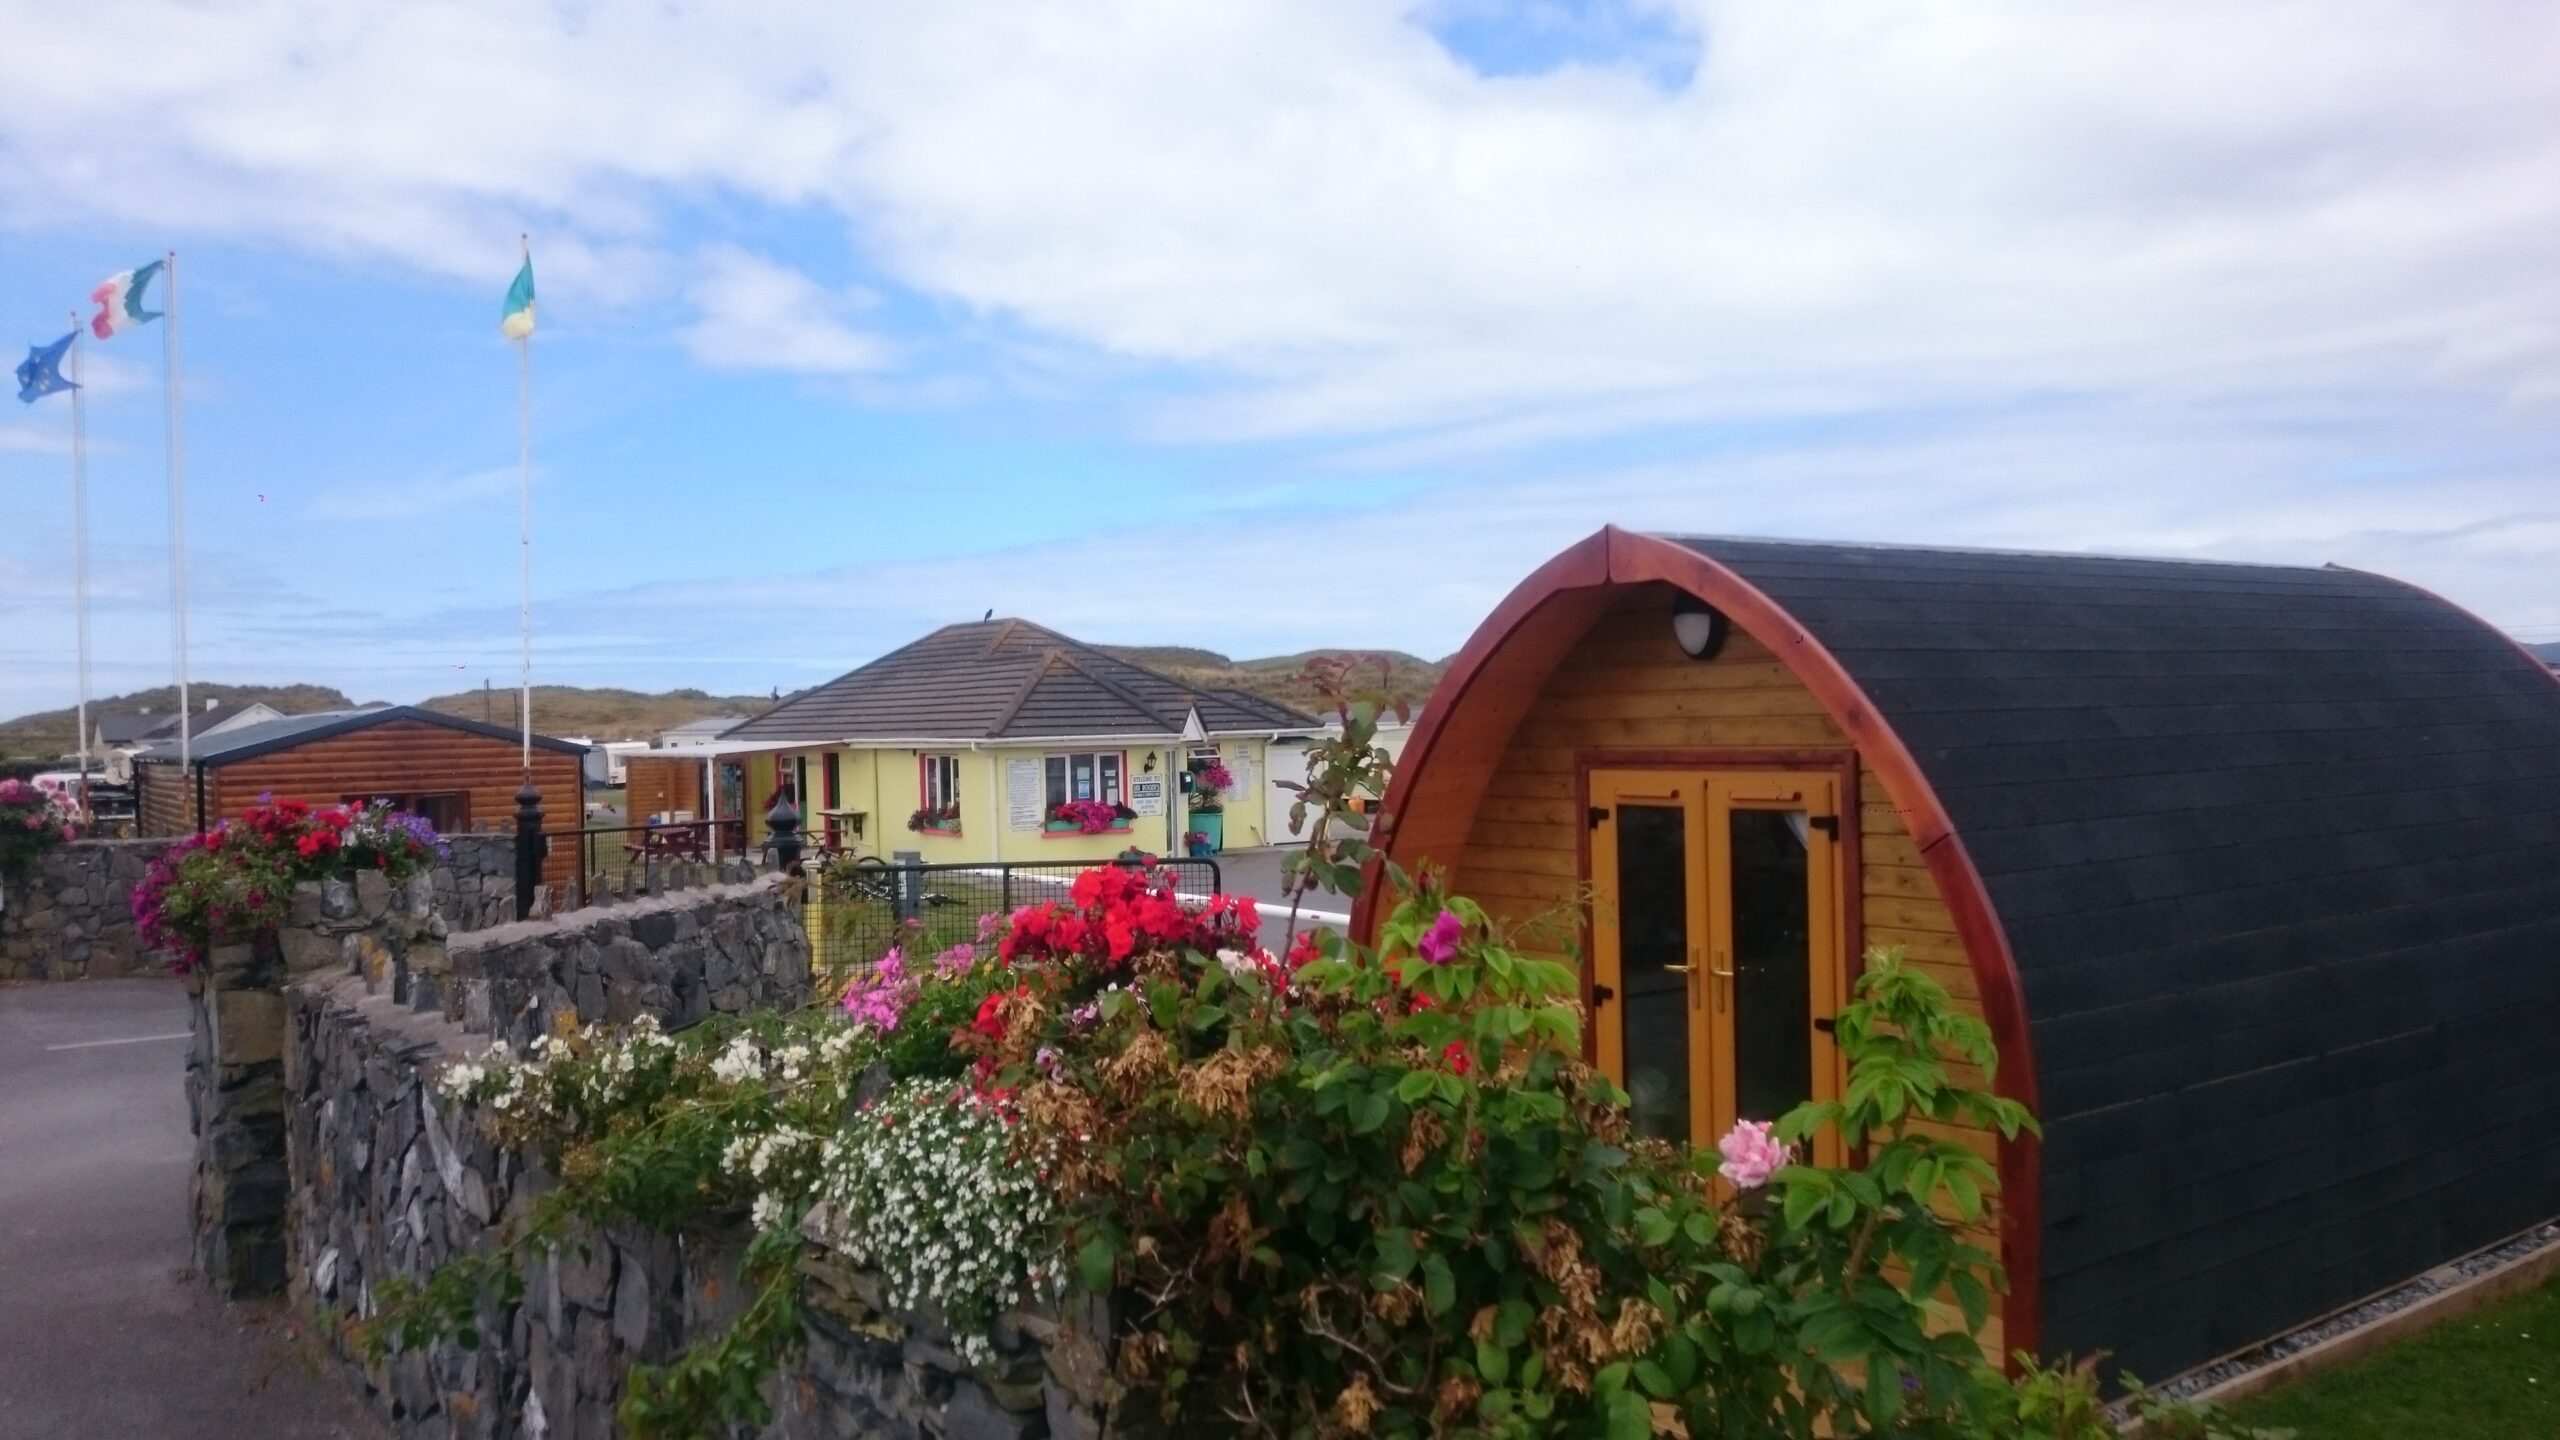 sir rogers glamping pods